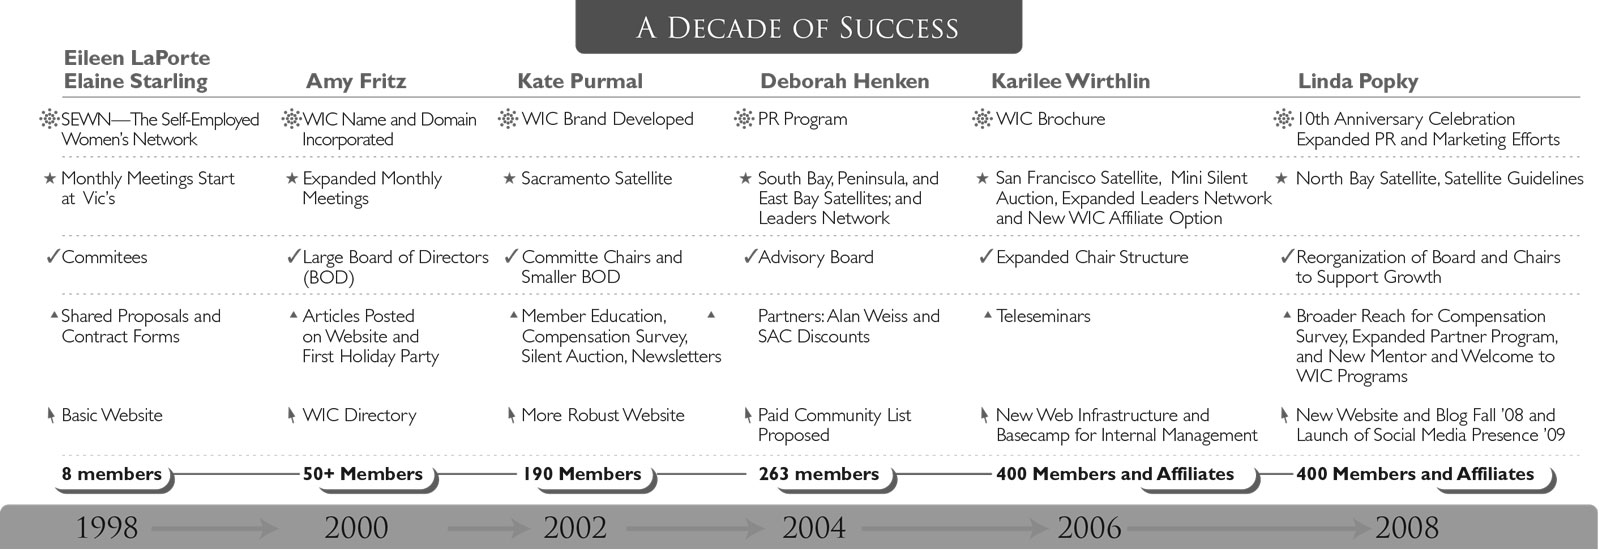 Women In Consulting 10-year Anniversary - Decade of Success